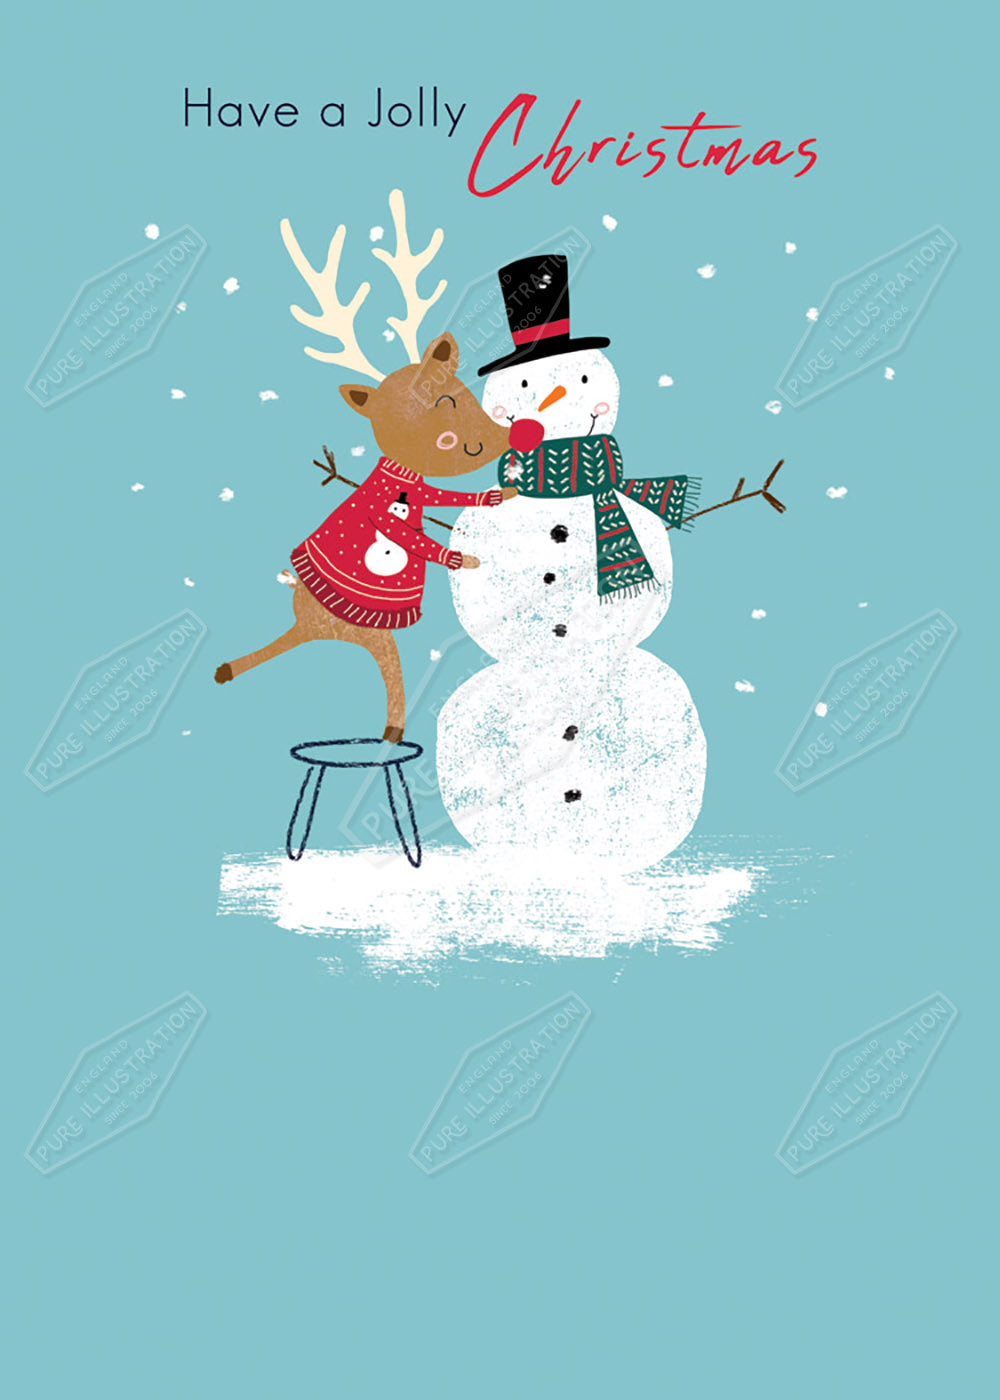 Reindeer Dressing Snowman Greeting Card Design by Cory Reid for Pure Art Licensing Agency & Surface Design Studio